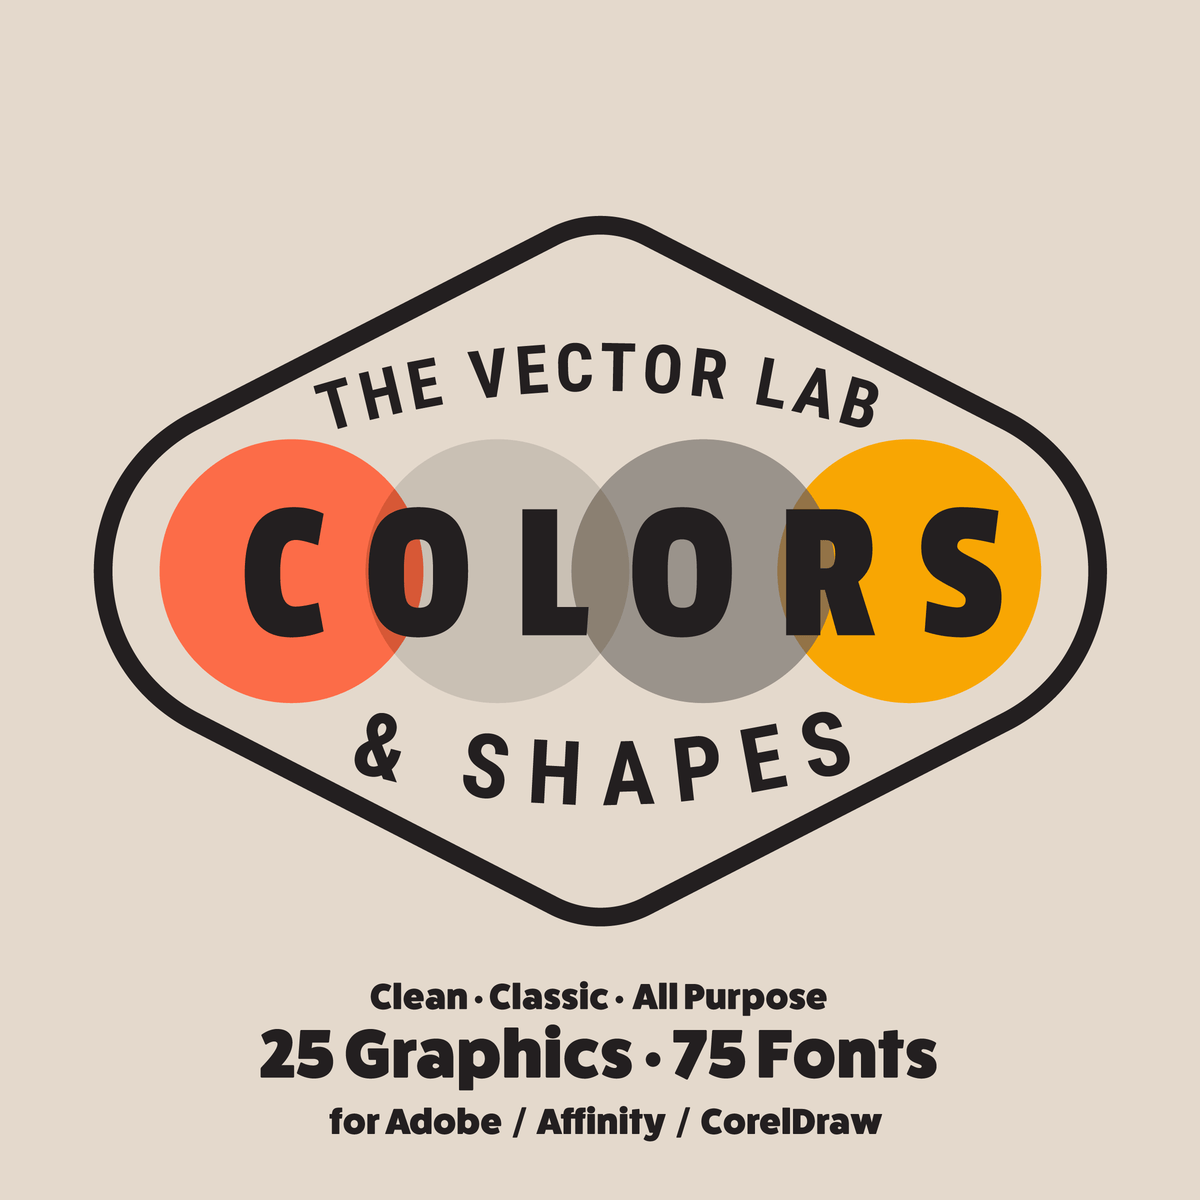 Colors &amp; Shapes Graphic Logo Templates for Adobe Affinity CorelDraw